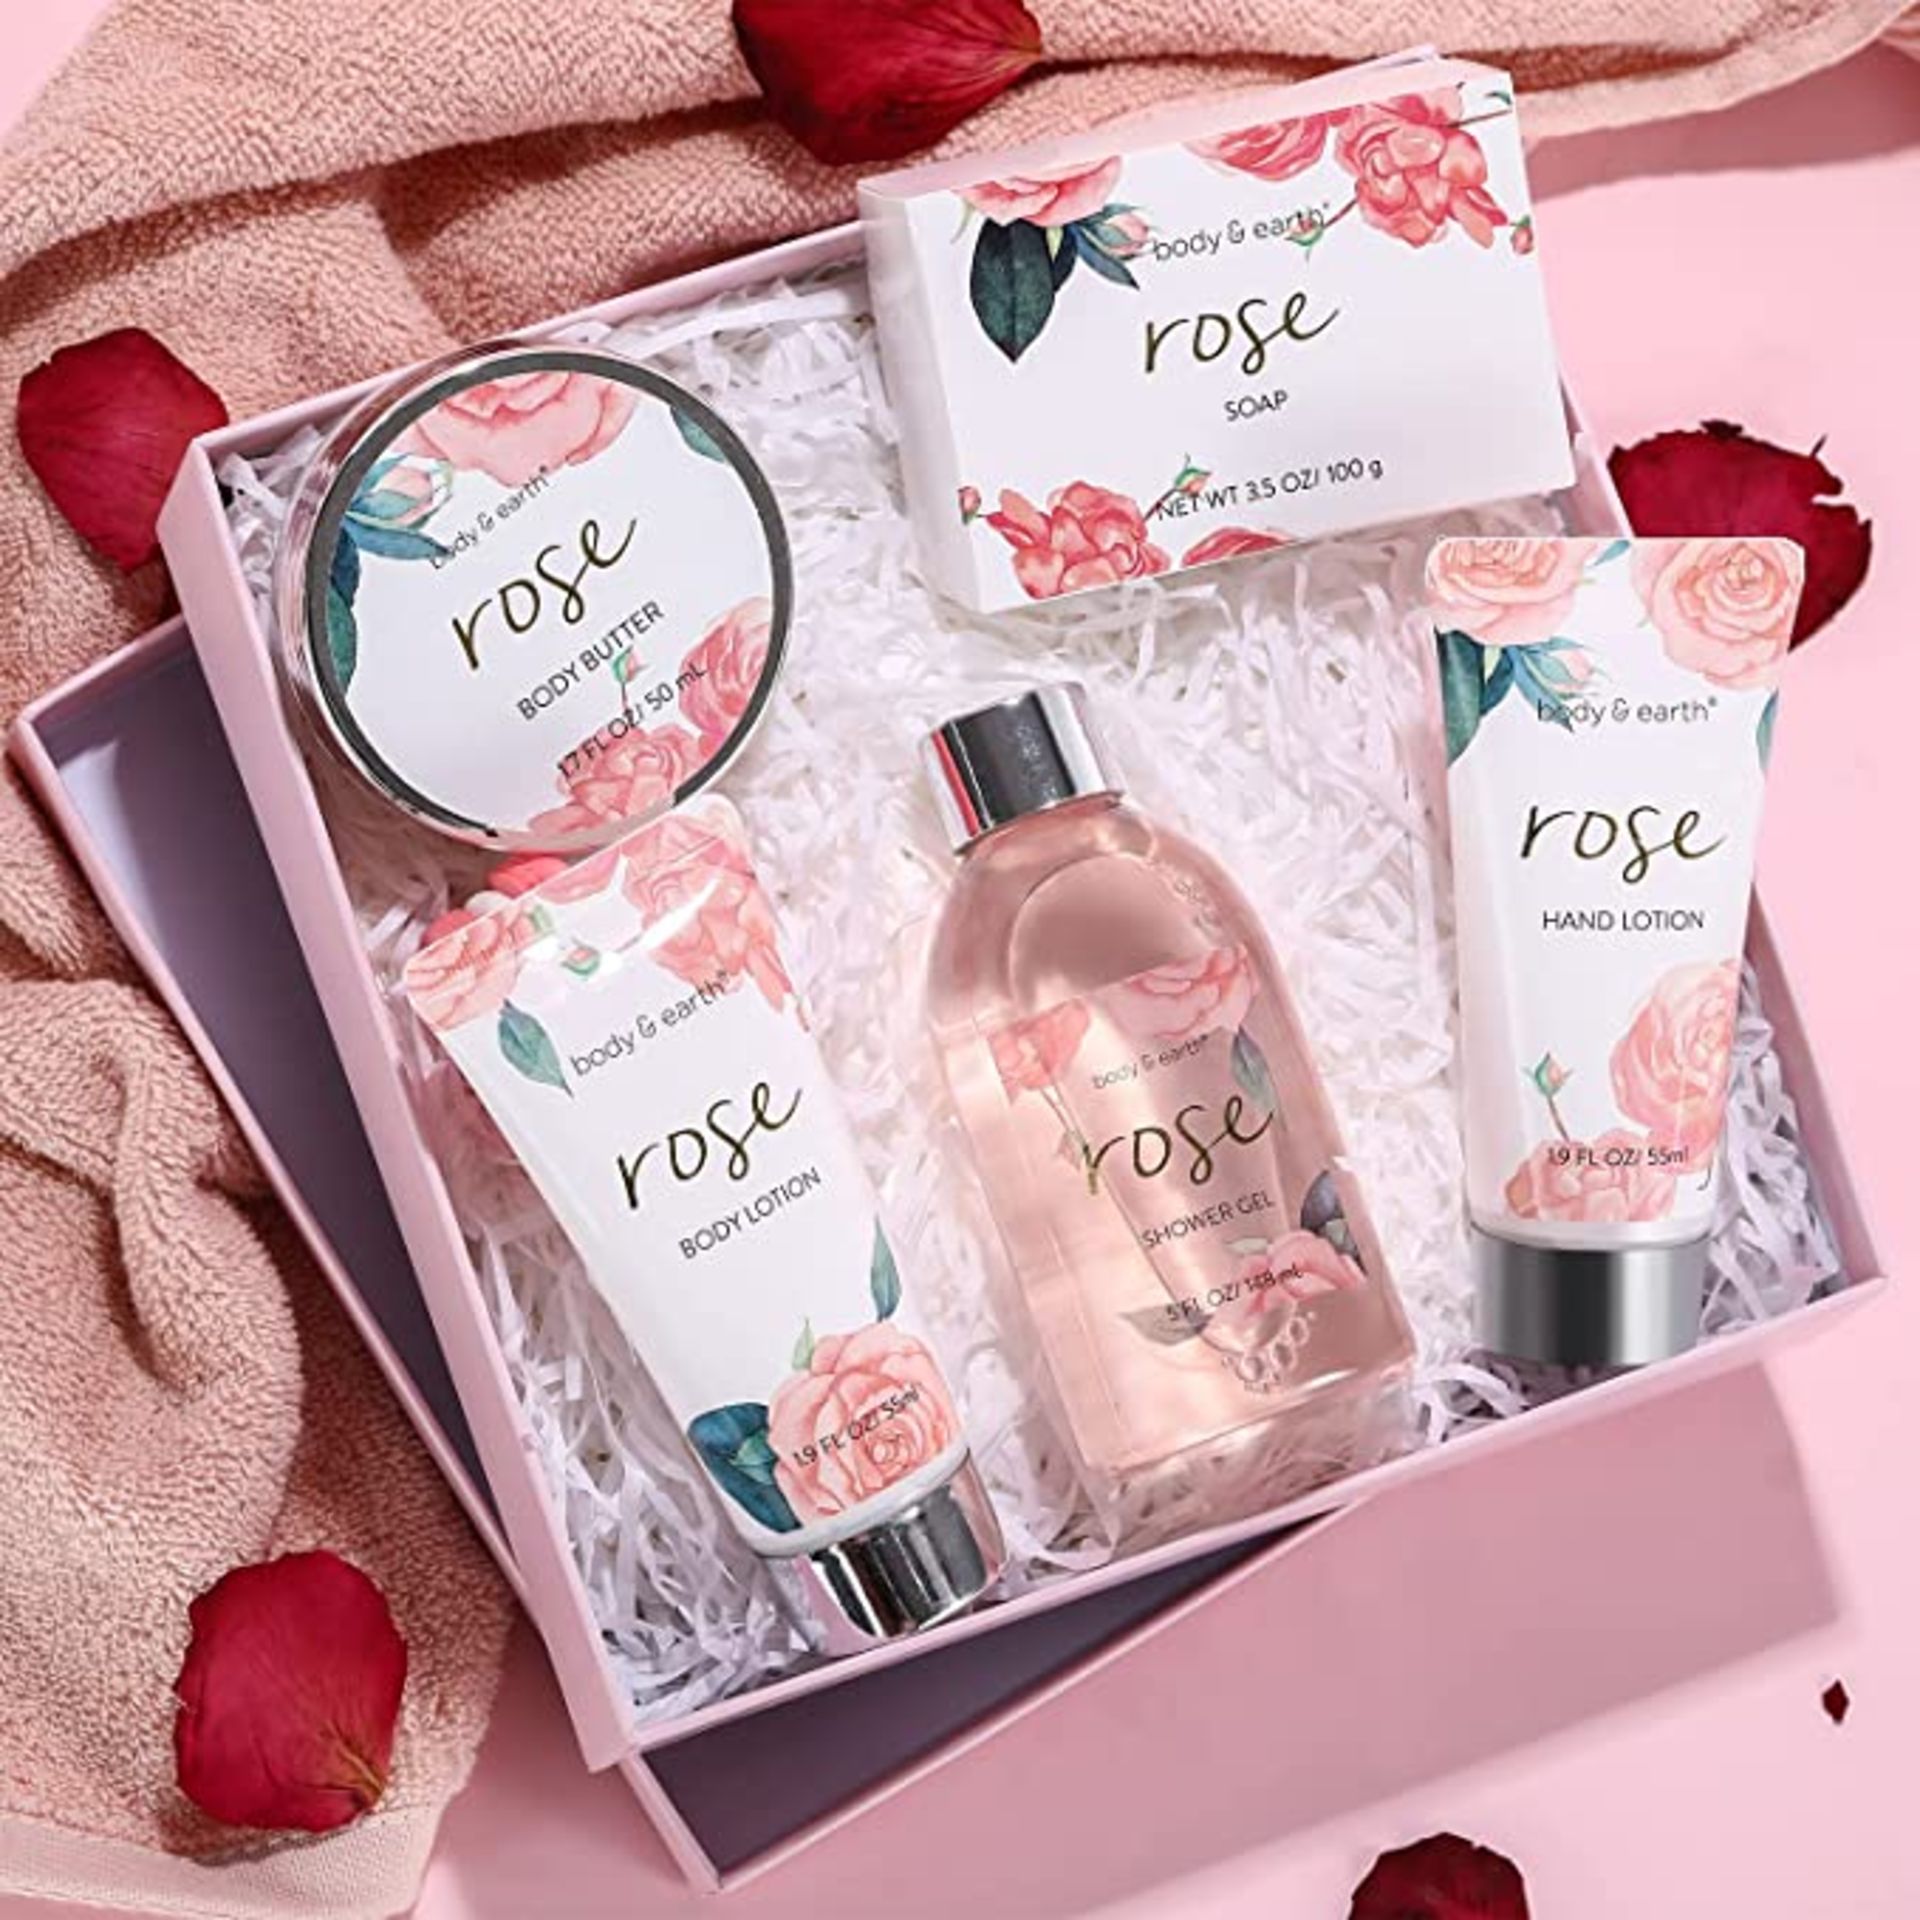 TRADE LOT 24 X NEW BOXED Body & Earth Rose Bath Spa Gift Box (BE-BP-020) Nourishing Ingredients: - Image 2 of 2